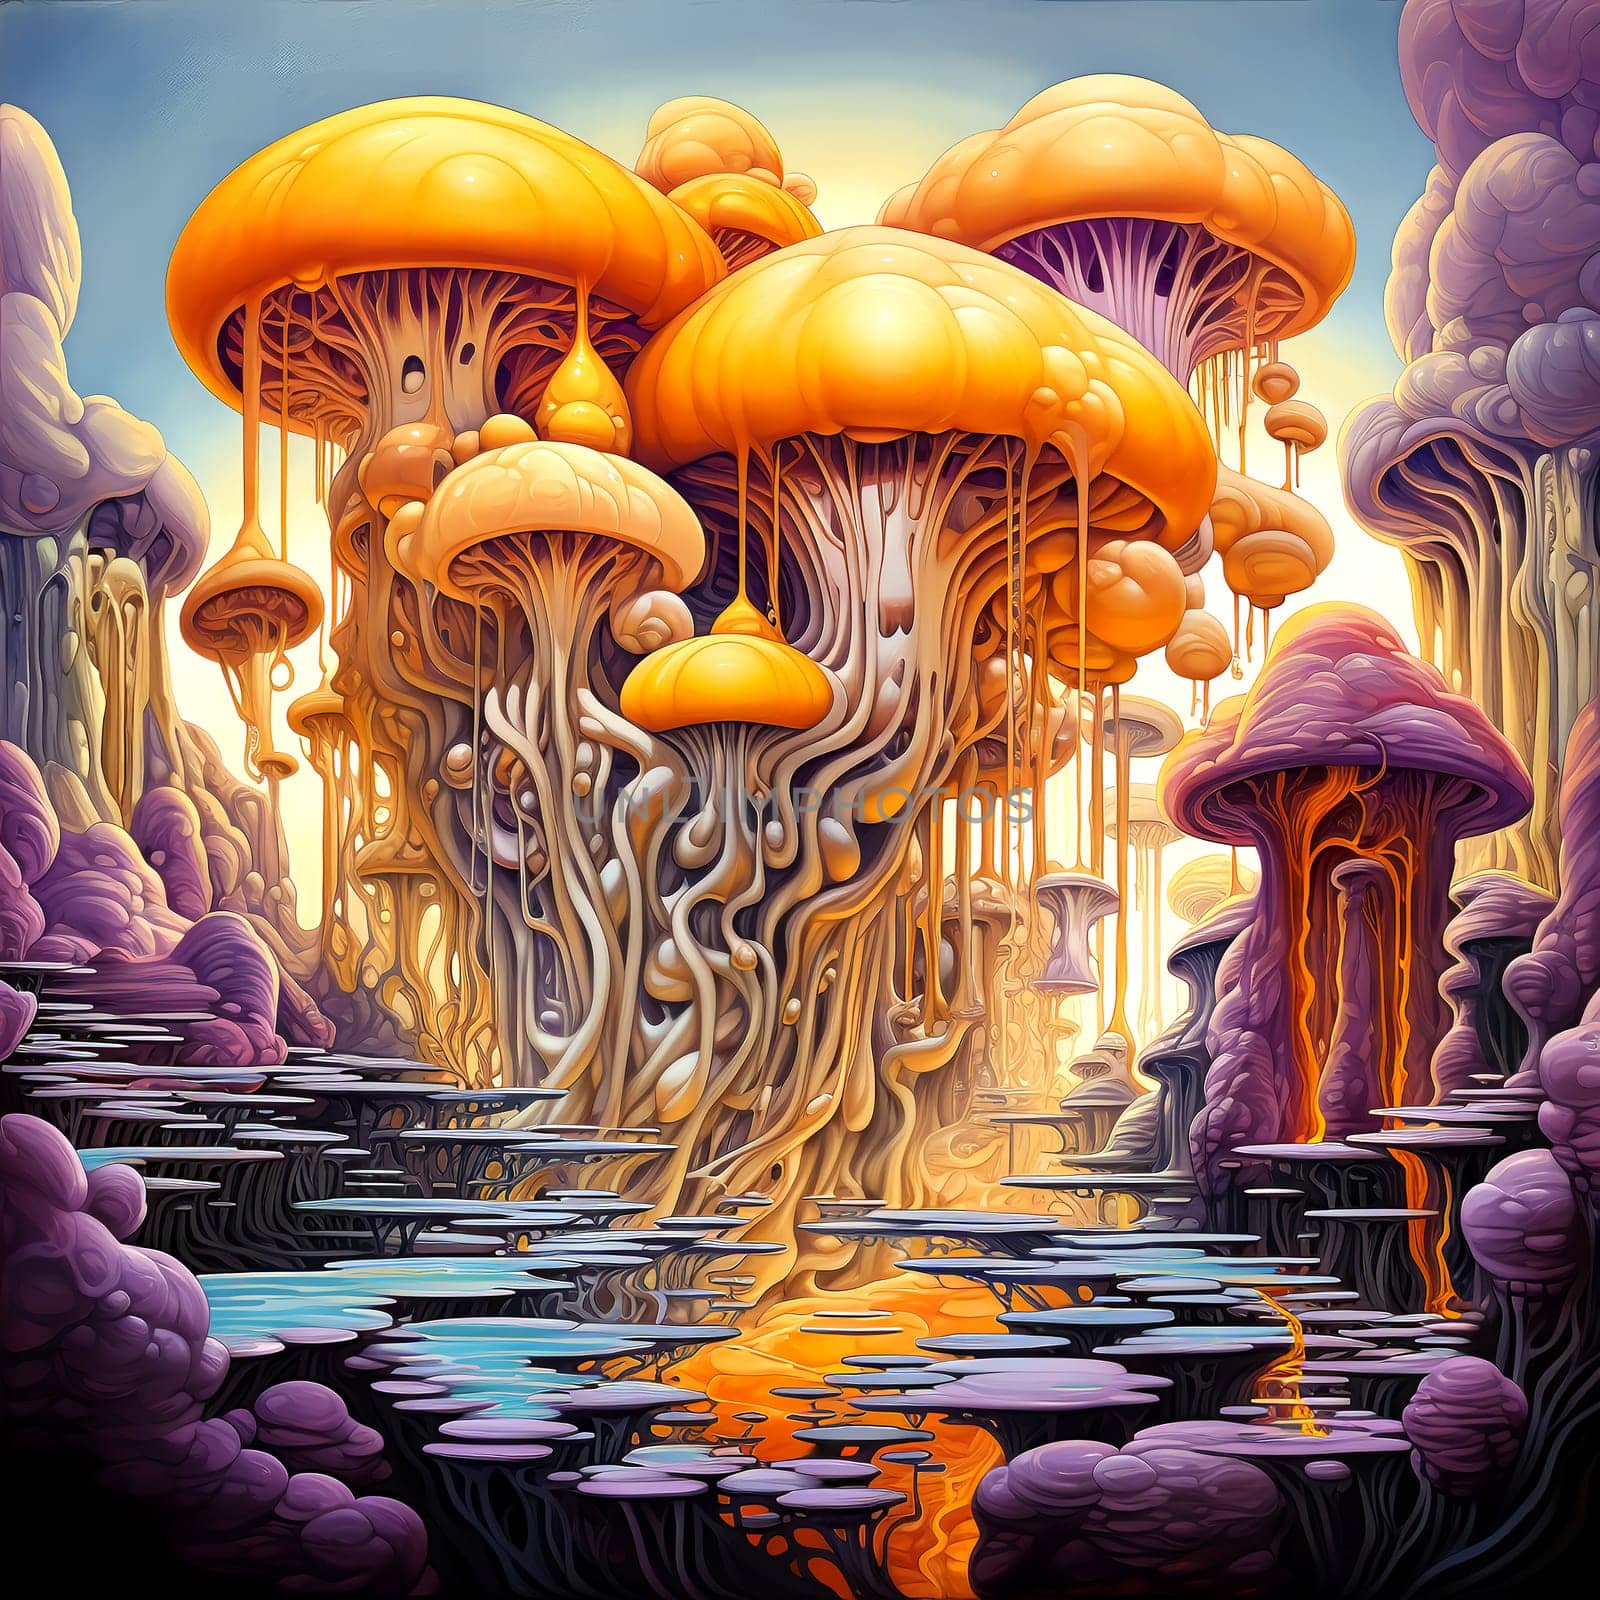 Psychedelic Poster with fantastic landscapes, mystical characters. 